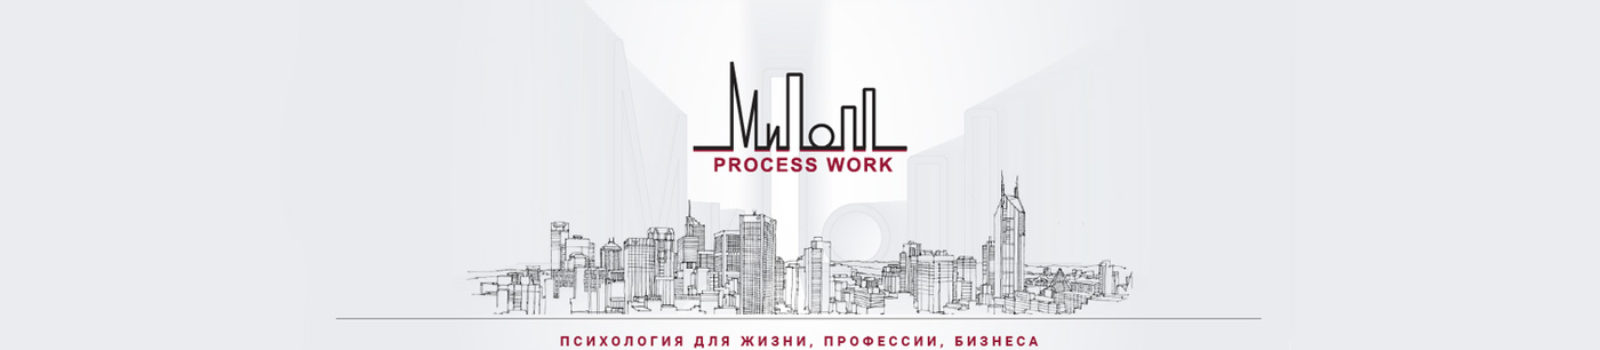 Moscow Event Header